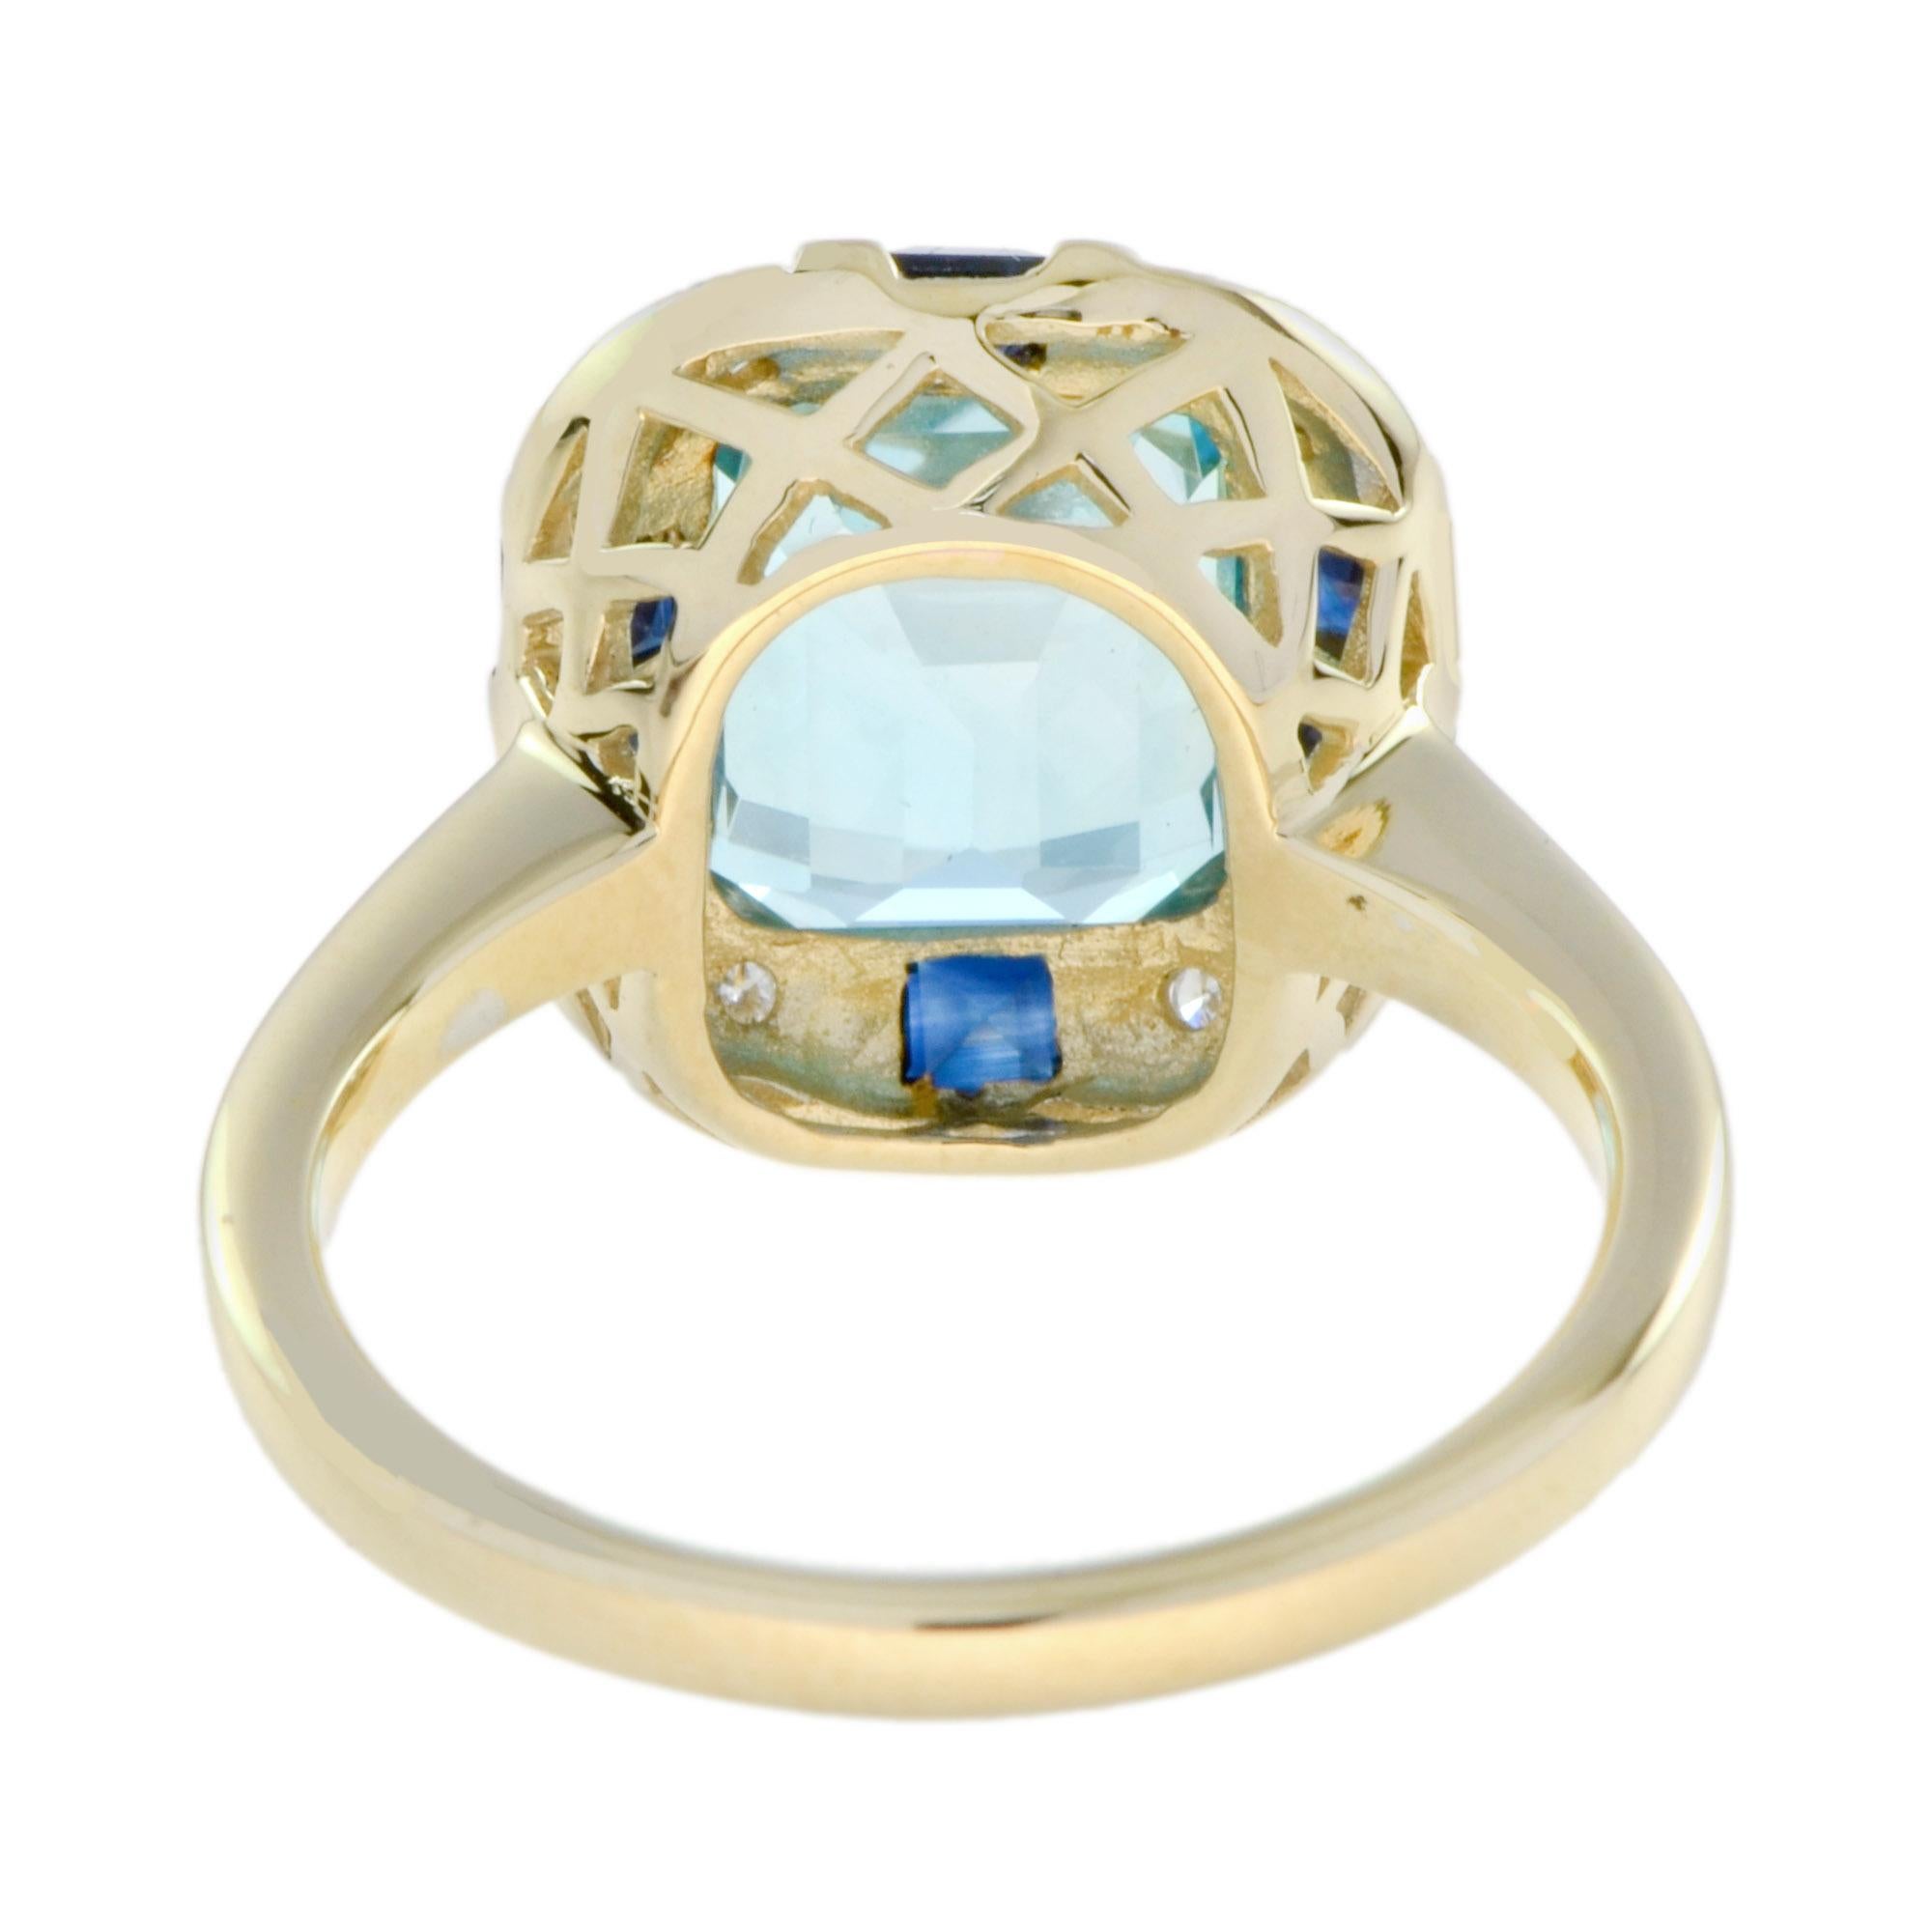 For Sale:  Art Deco Style Blue Topaz Sapphire and Diamond Ring in White Top Yellow Gold 5